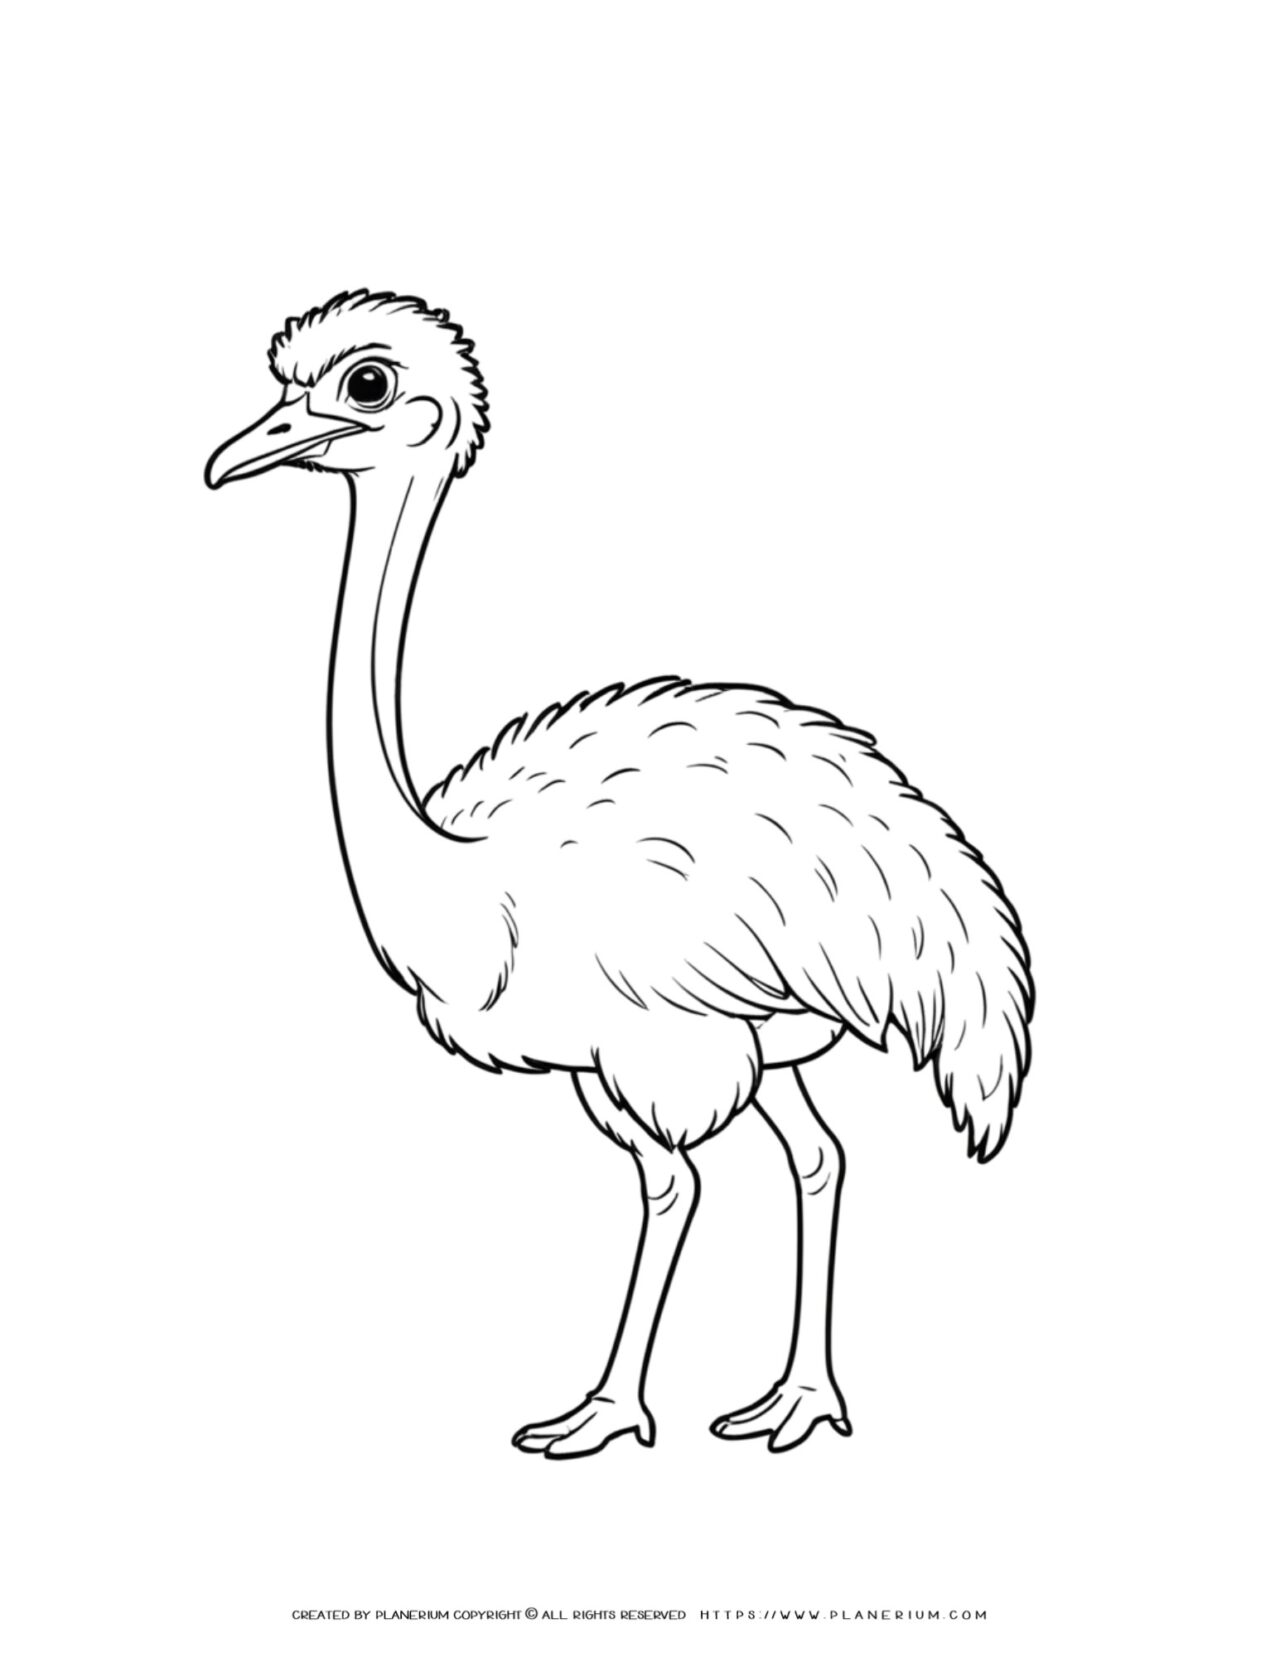 ostrich-side-view-outline-comic-style-coloring-page